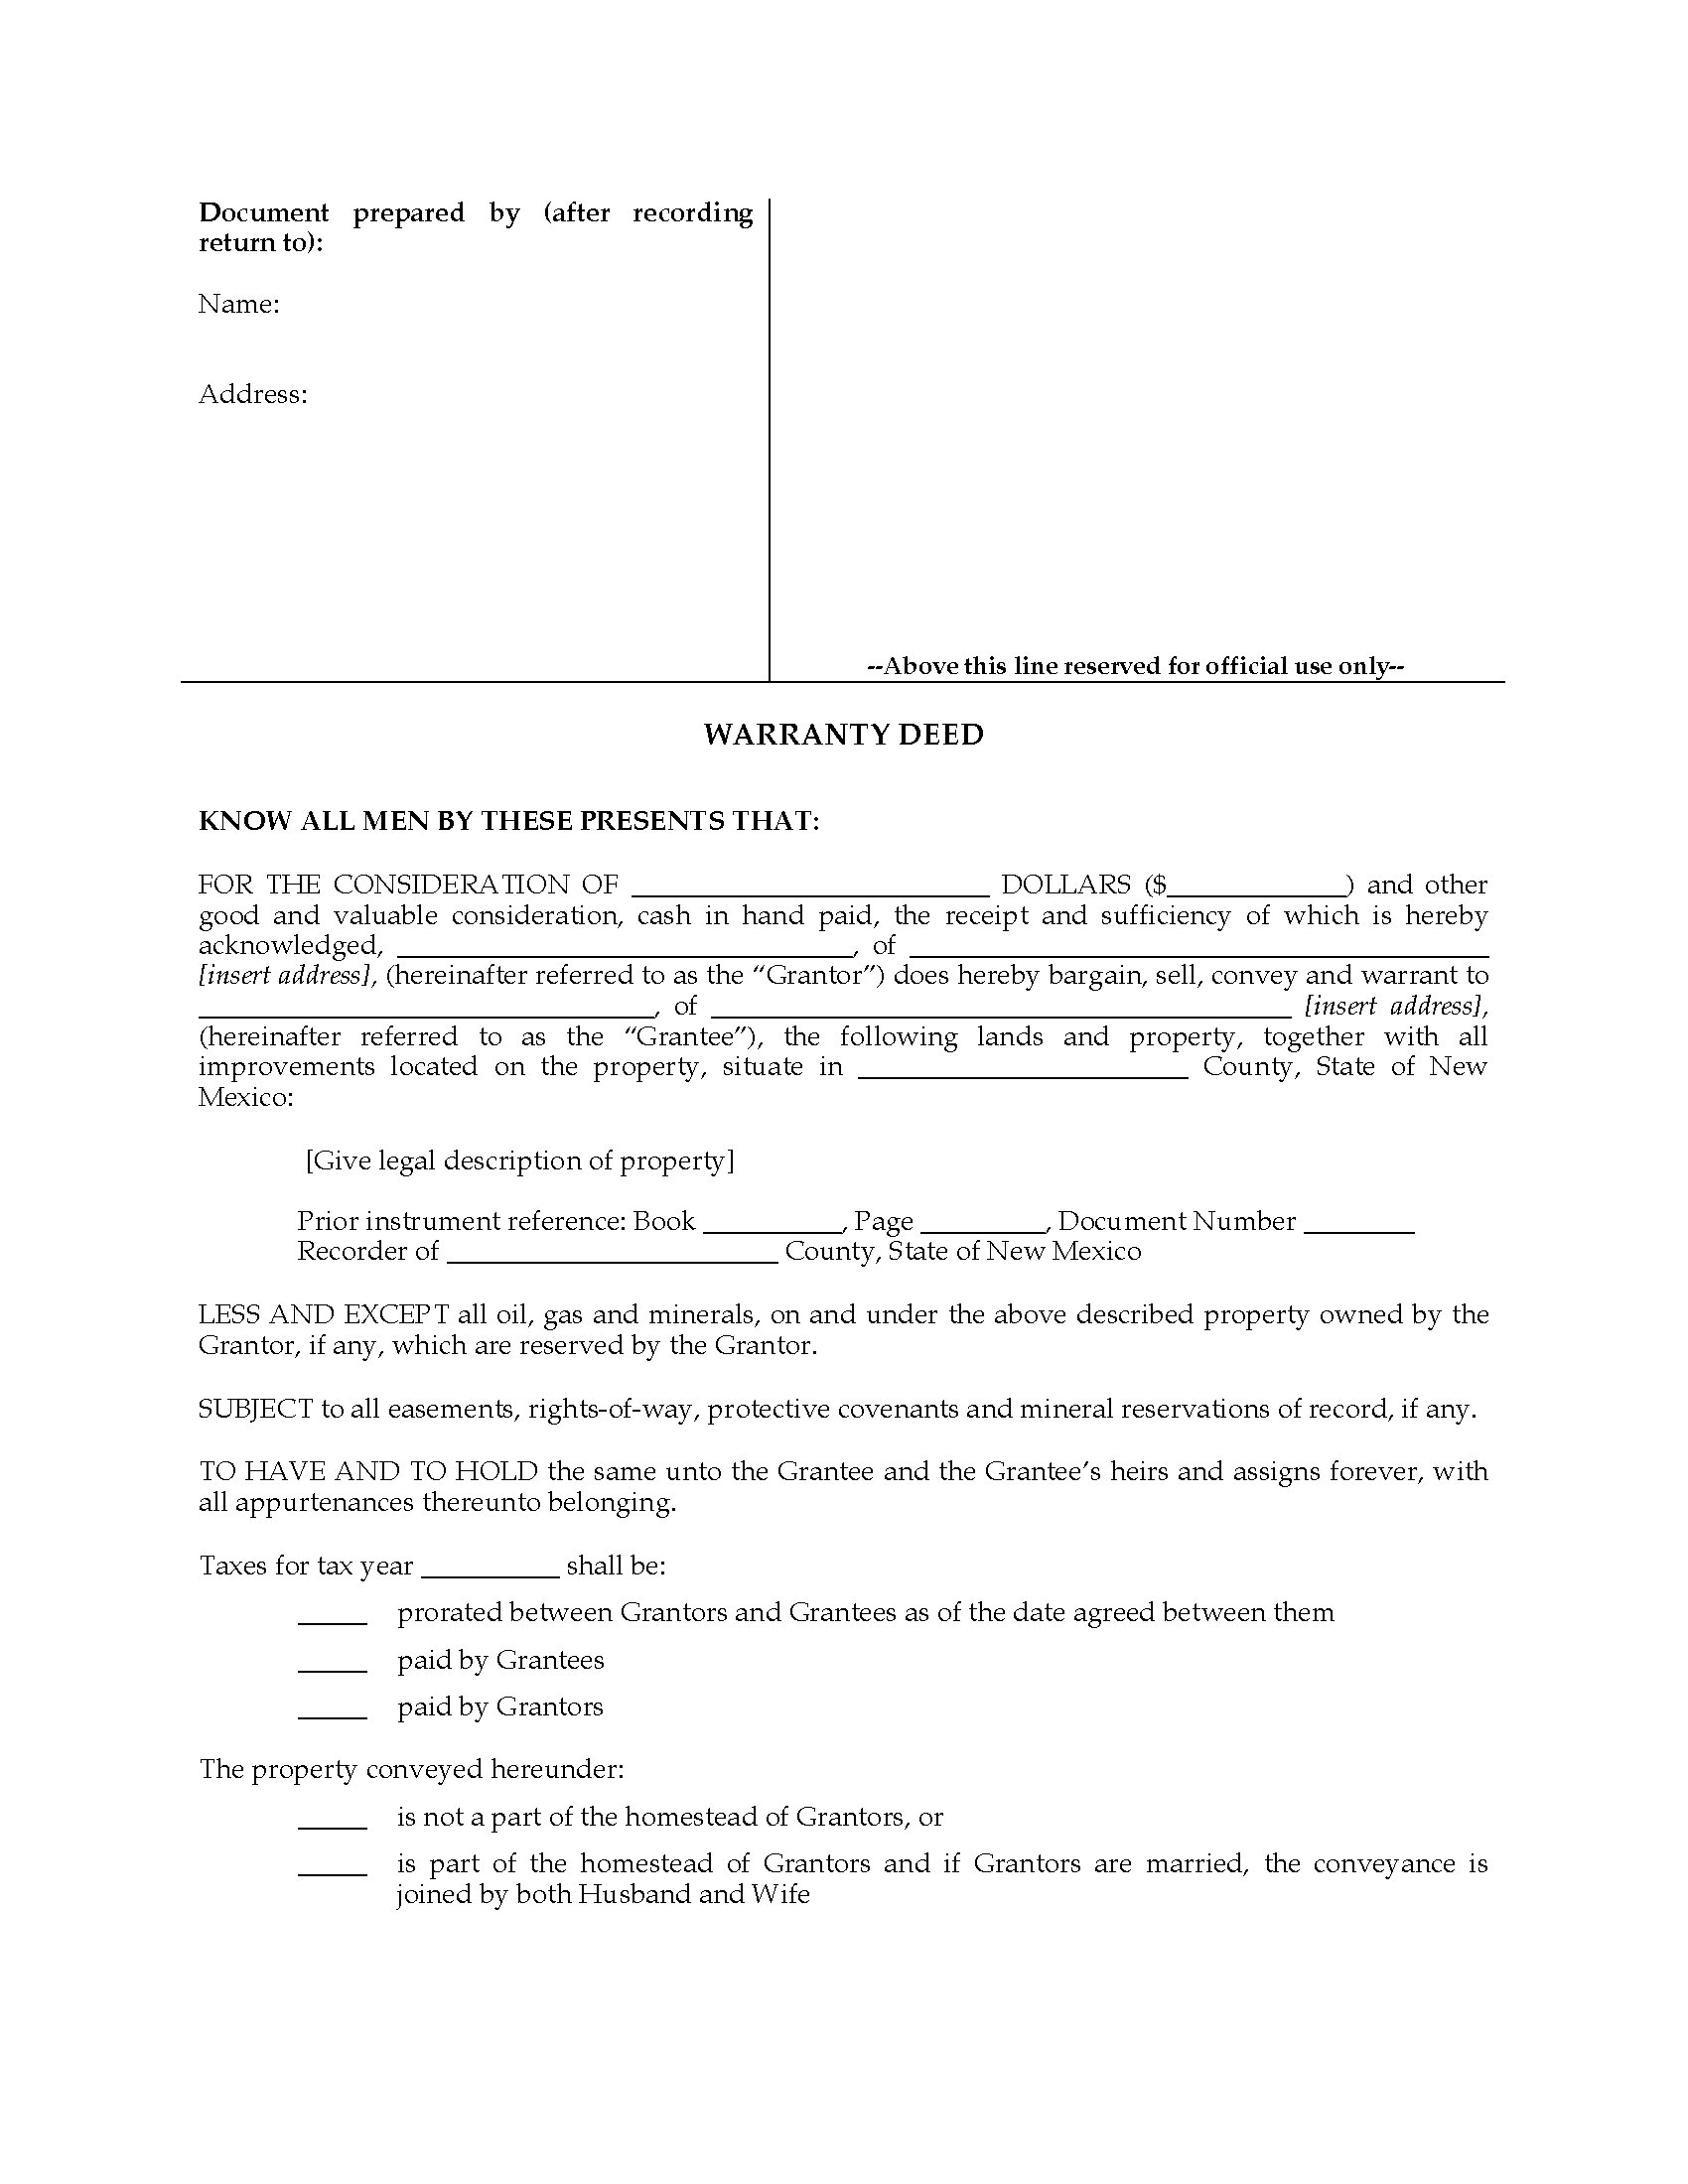 New Mexico Warranty Deed Form Legal Forms and Business Templates